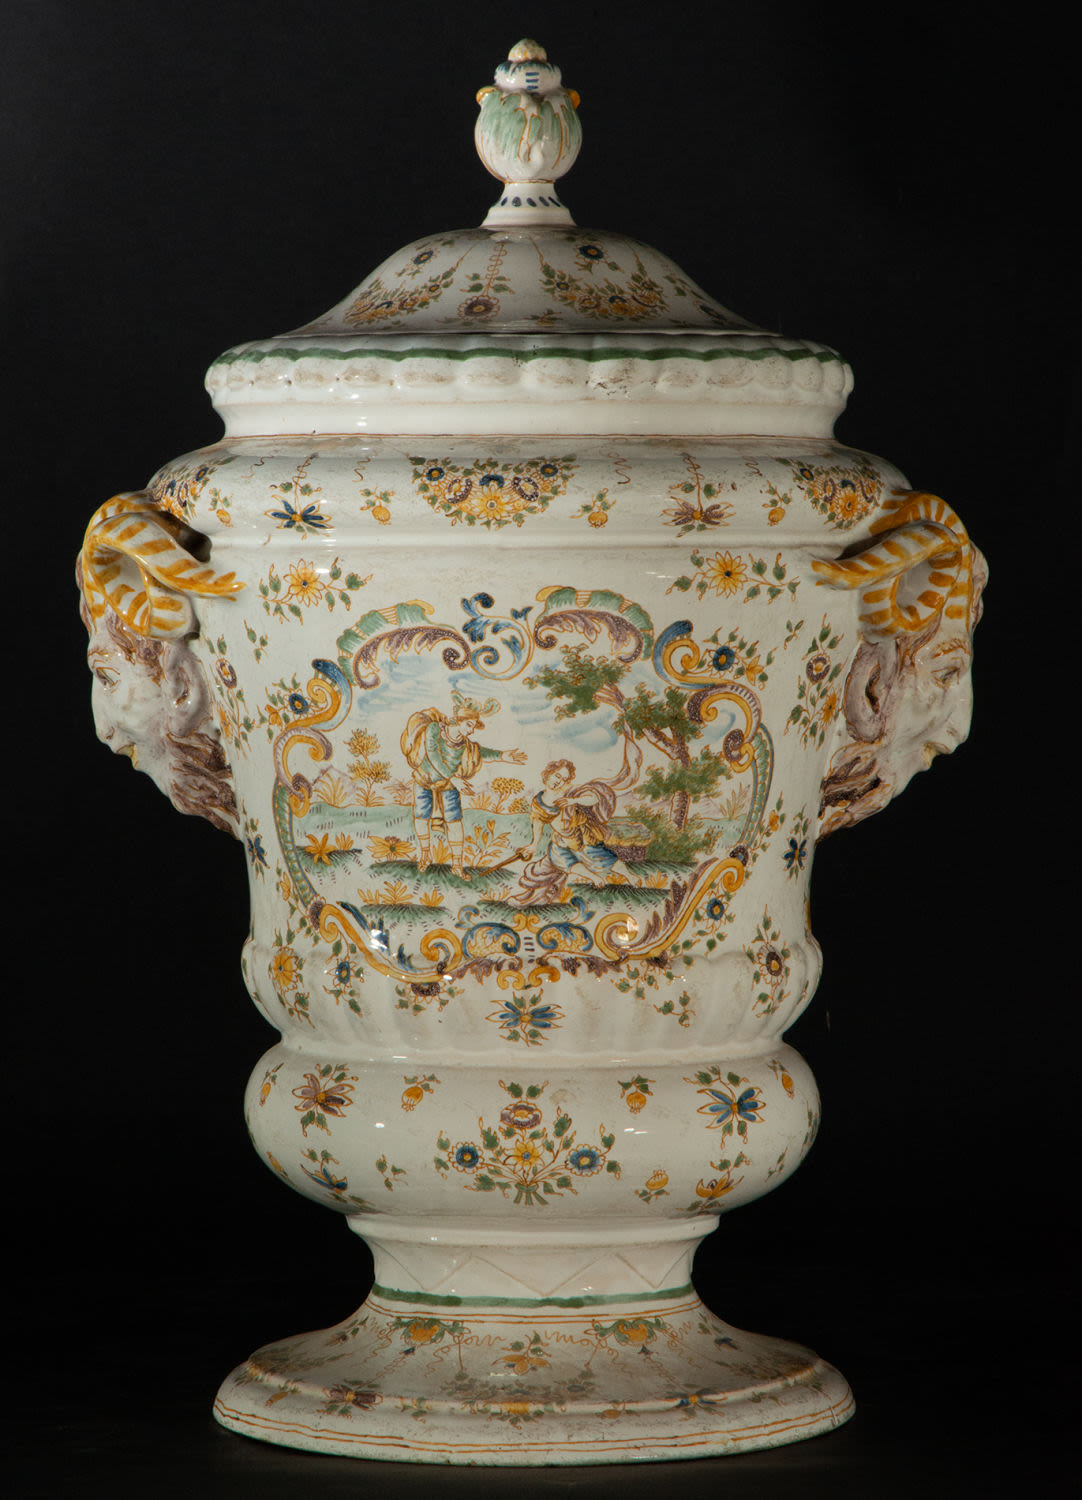 Ceramic vase from Moustiers, France, 18th century - Image 6 of 6